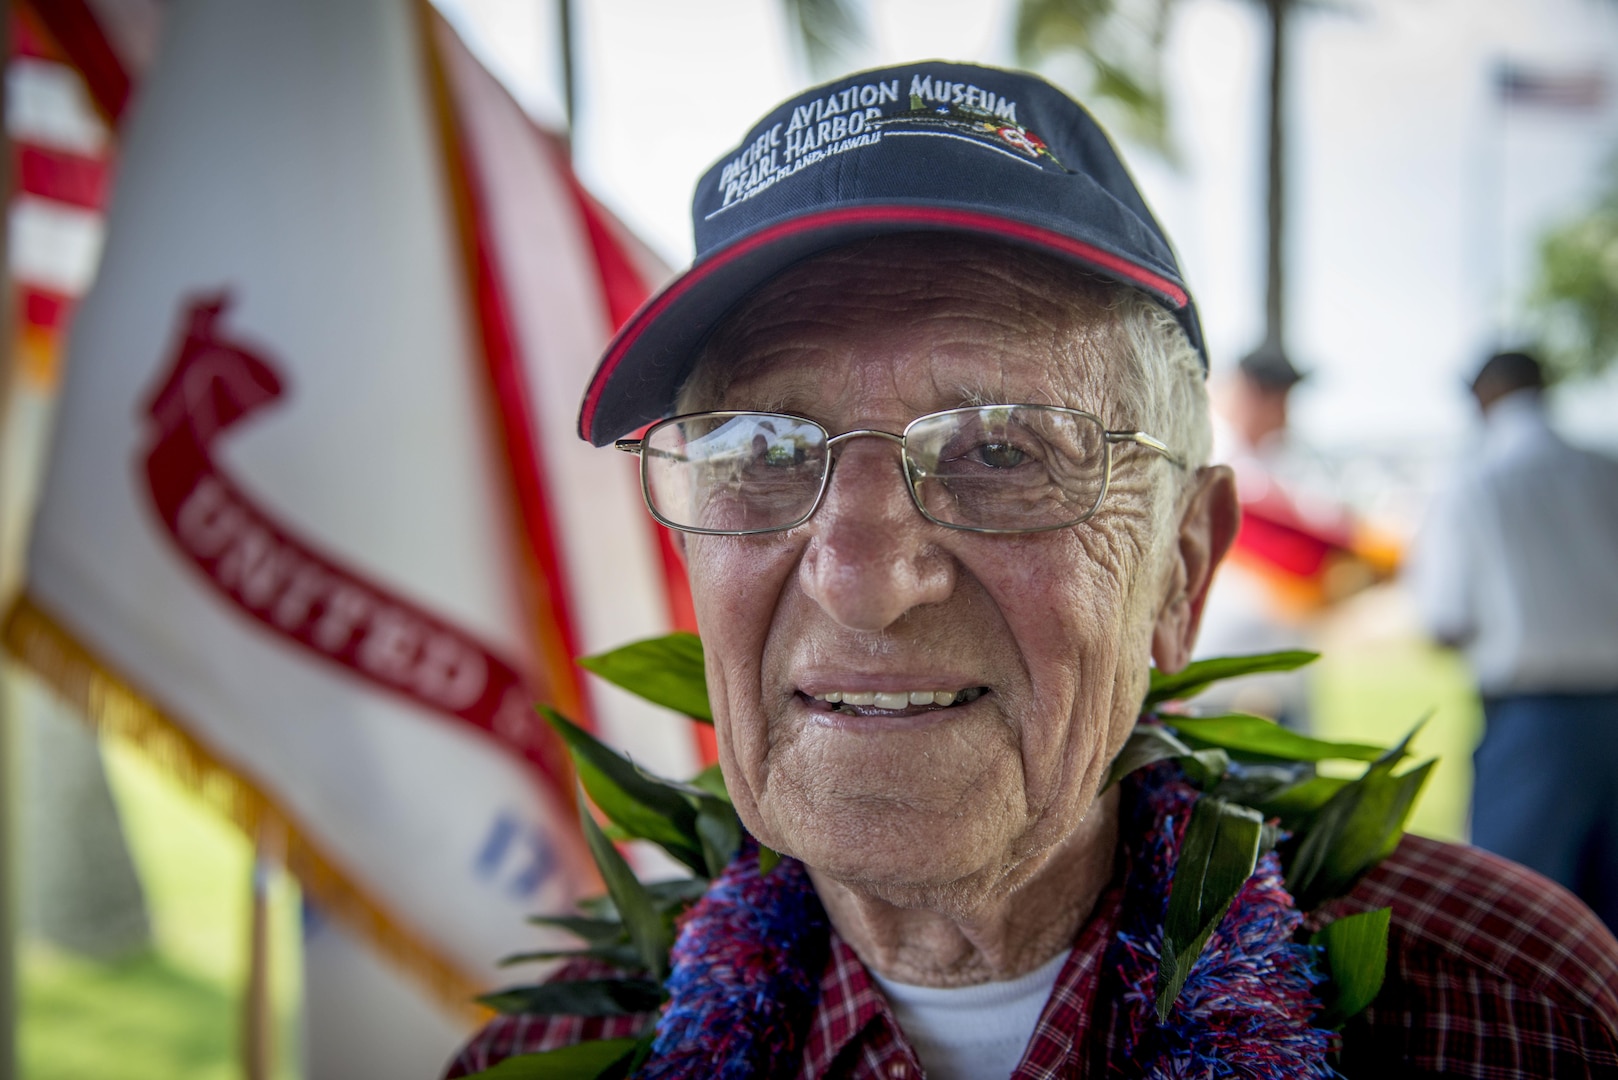 Charles Wolf, a World War ll veteran, smiles after a surprise ceremony held in his honor, at the Pearl Harbor Education Center, Hawaii, May 6, 2016. Wolf was presented a shadow box containing awards and medals by  Brig. Gen. Mark Spindler, Deputy Director of the Defense POW/MIA Accounting Agency (DPAA). After 72 years Wolf received the recognition he deserved for serving his country so many years ago. DPAA's mission is to provide the fullest possible accounting for our missing personnel to their families and the nation. (DoD photo by MC2 Aiyana Paschal/RELEASED)